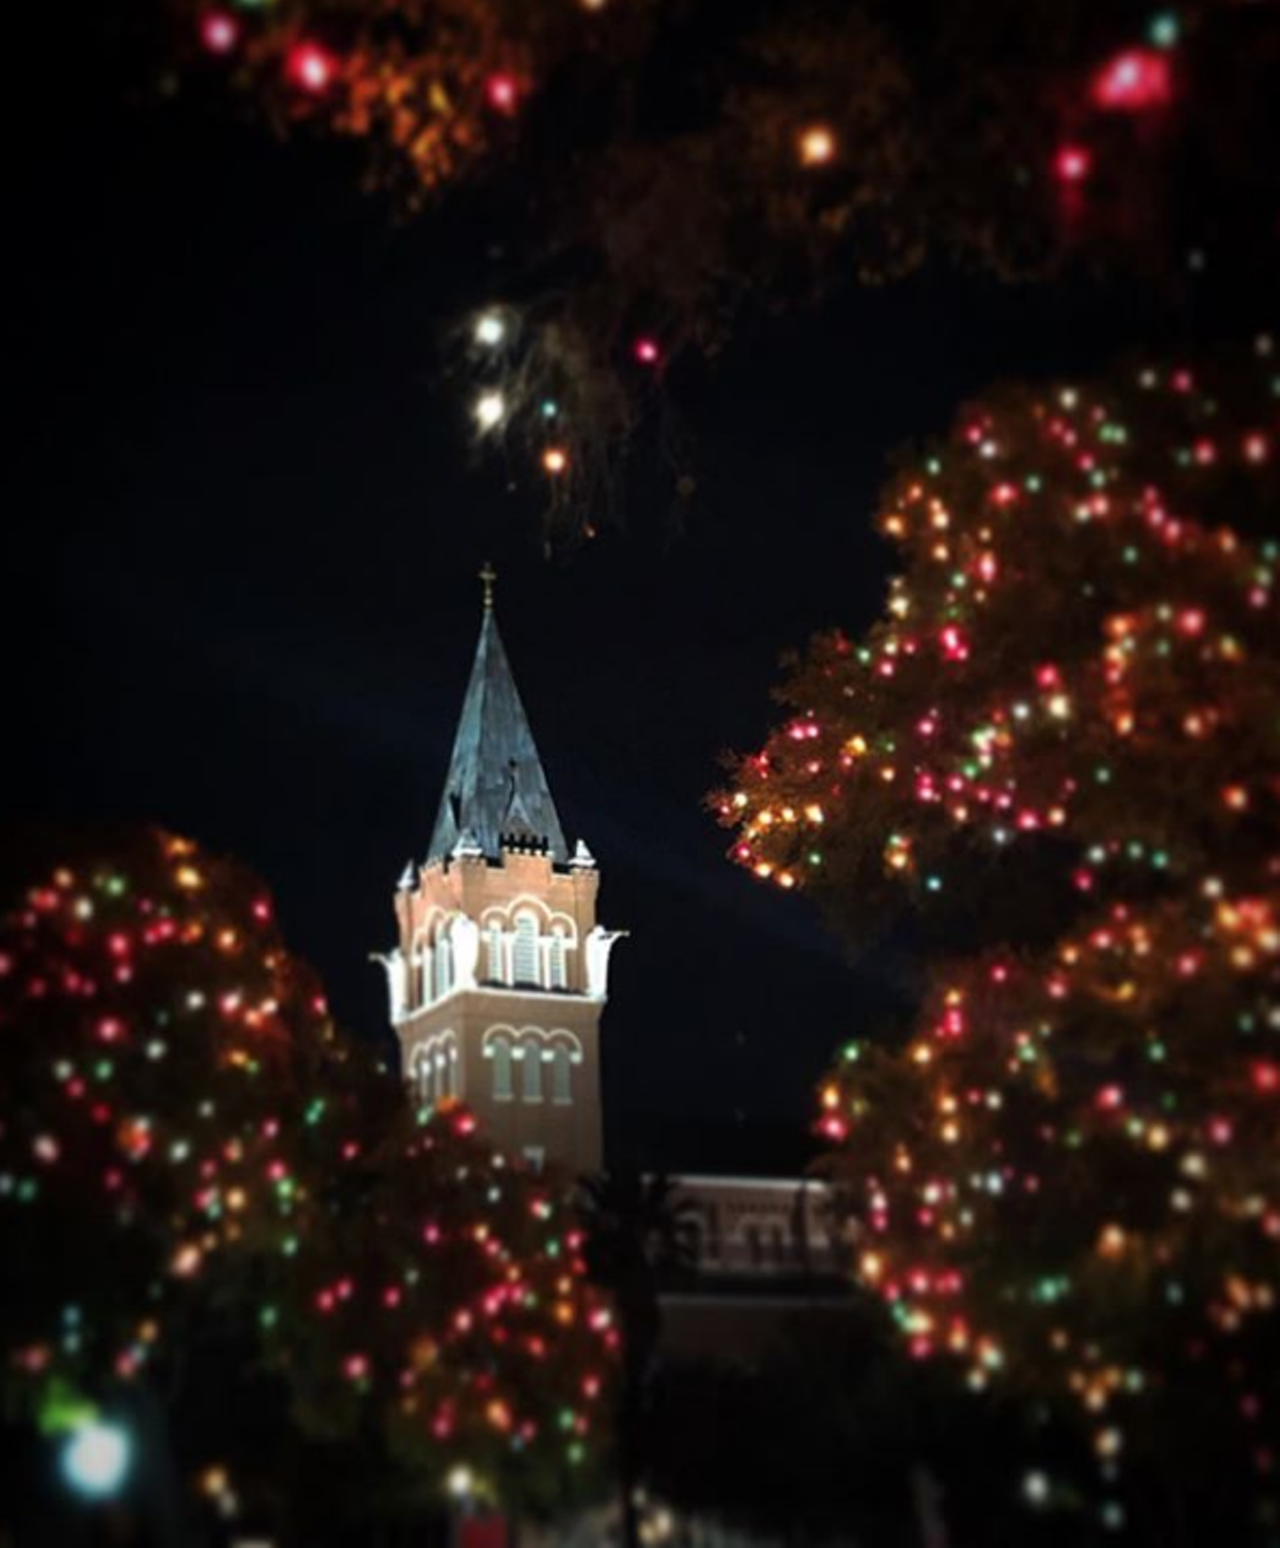 University of the Incarnate Word
4301 Broadway Street, lightthewaysa.com
Though the opening night festivities of Light The Way have since passed, the beautiful display of lights across the UIW campus remain. You’ll find lights nestled on numerous trees that literally light the way across campus.
Photo via Instagram / runjacksrun